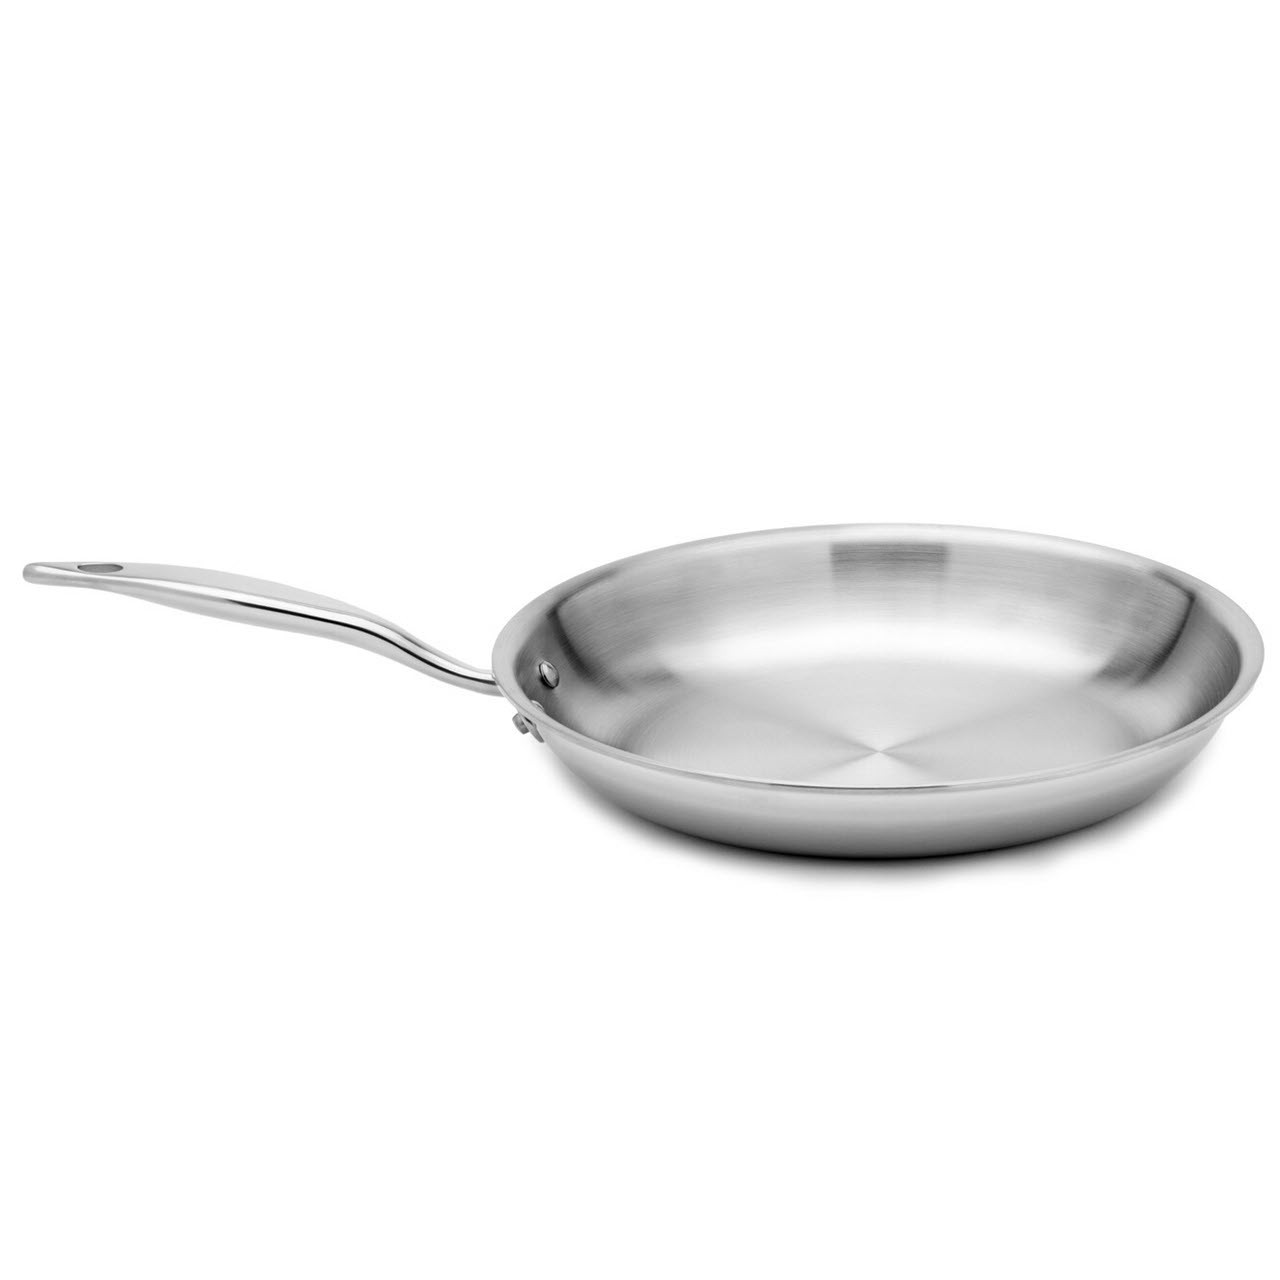 https://cdn11.bigcommerce.com/s-21kj3ntgv1/images/stencil/1280x1280/products/401/3115/Heritage-Steel-12-Inch-Fry-Pan-side-view__85070.1691269813.jpg?c=2